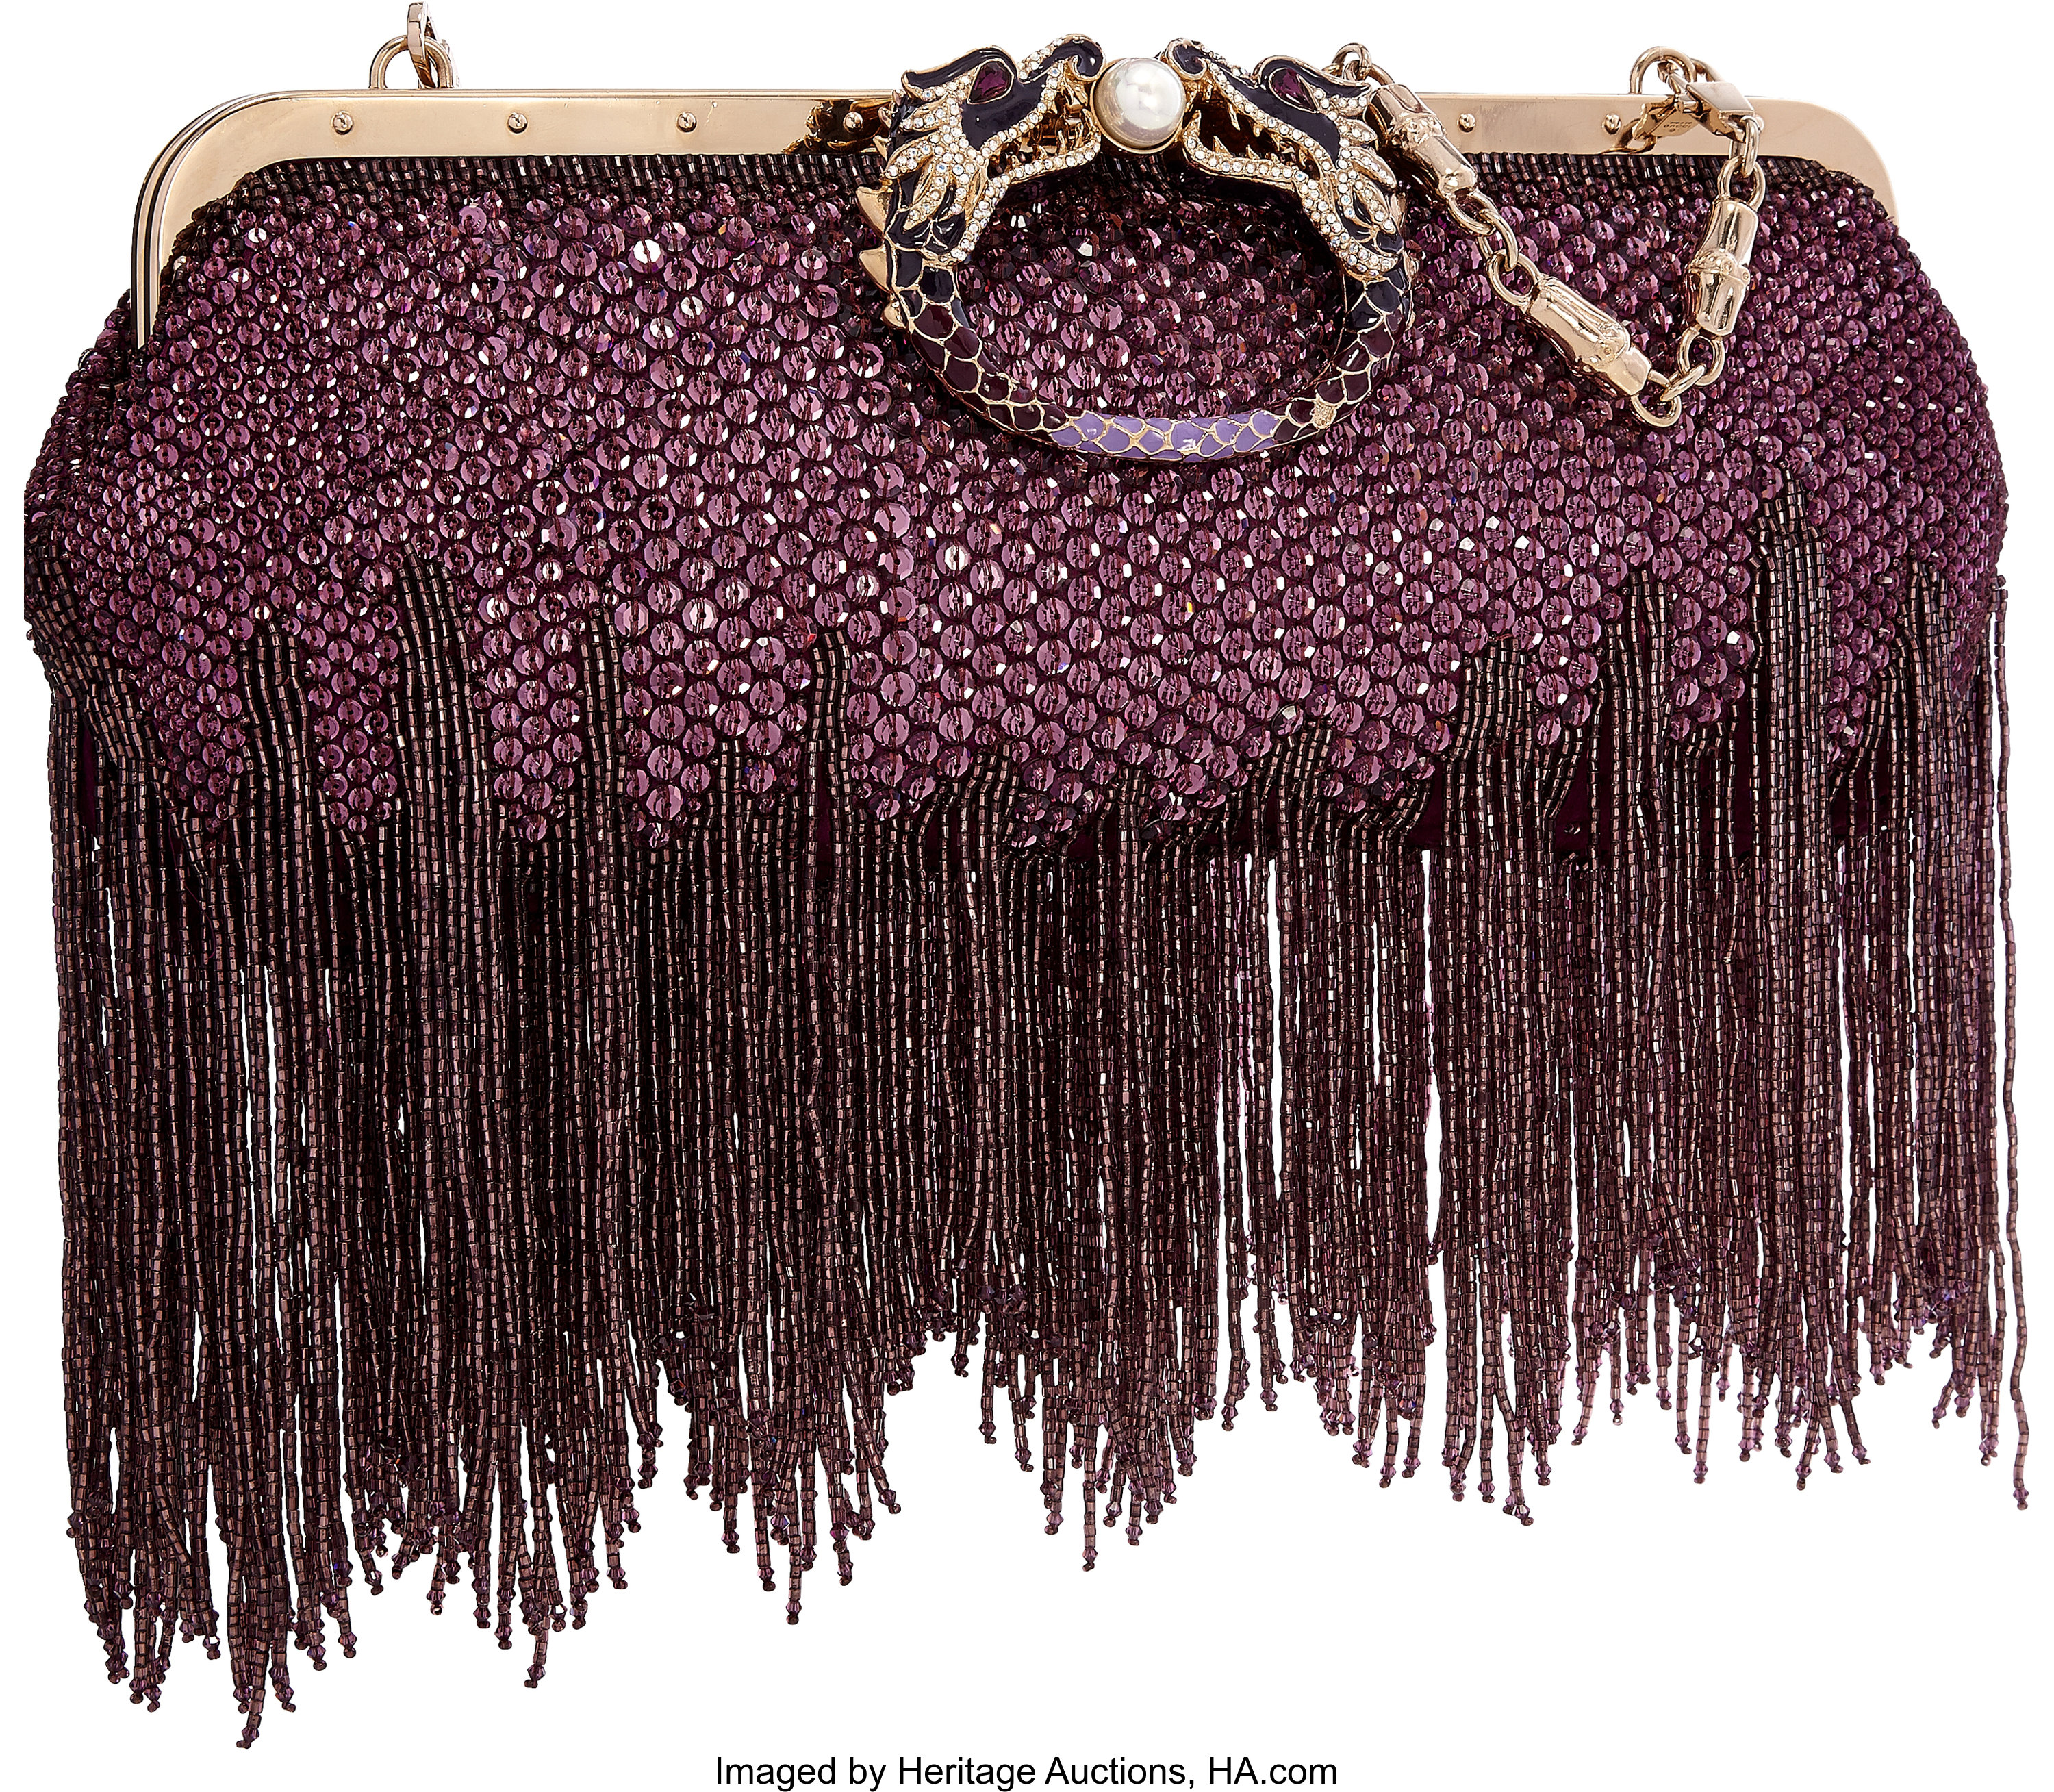 TOM FORD Sequin Large Zip Detail Clutch Bag With Paper clip Chain